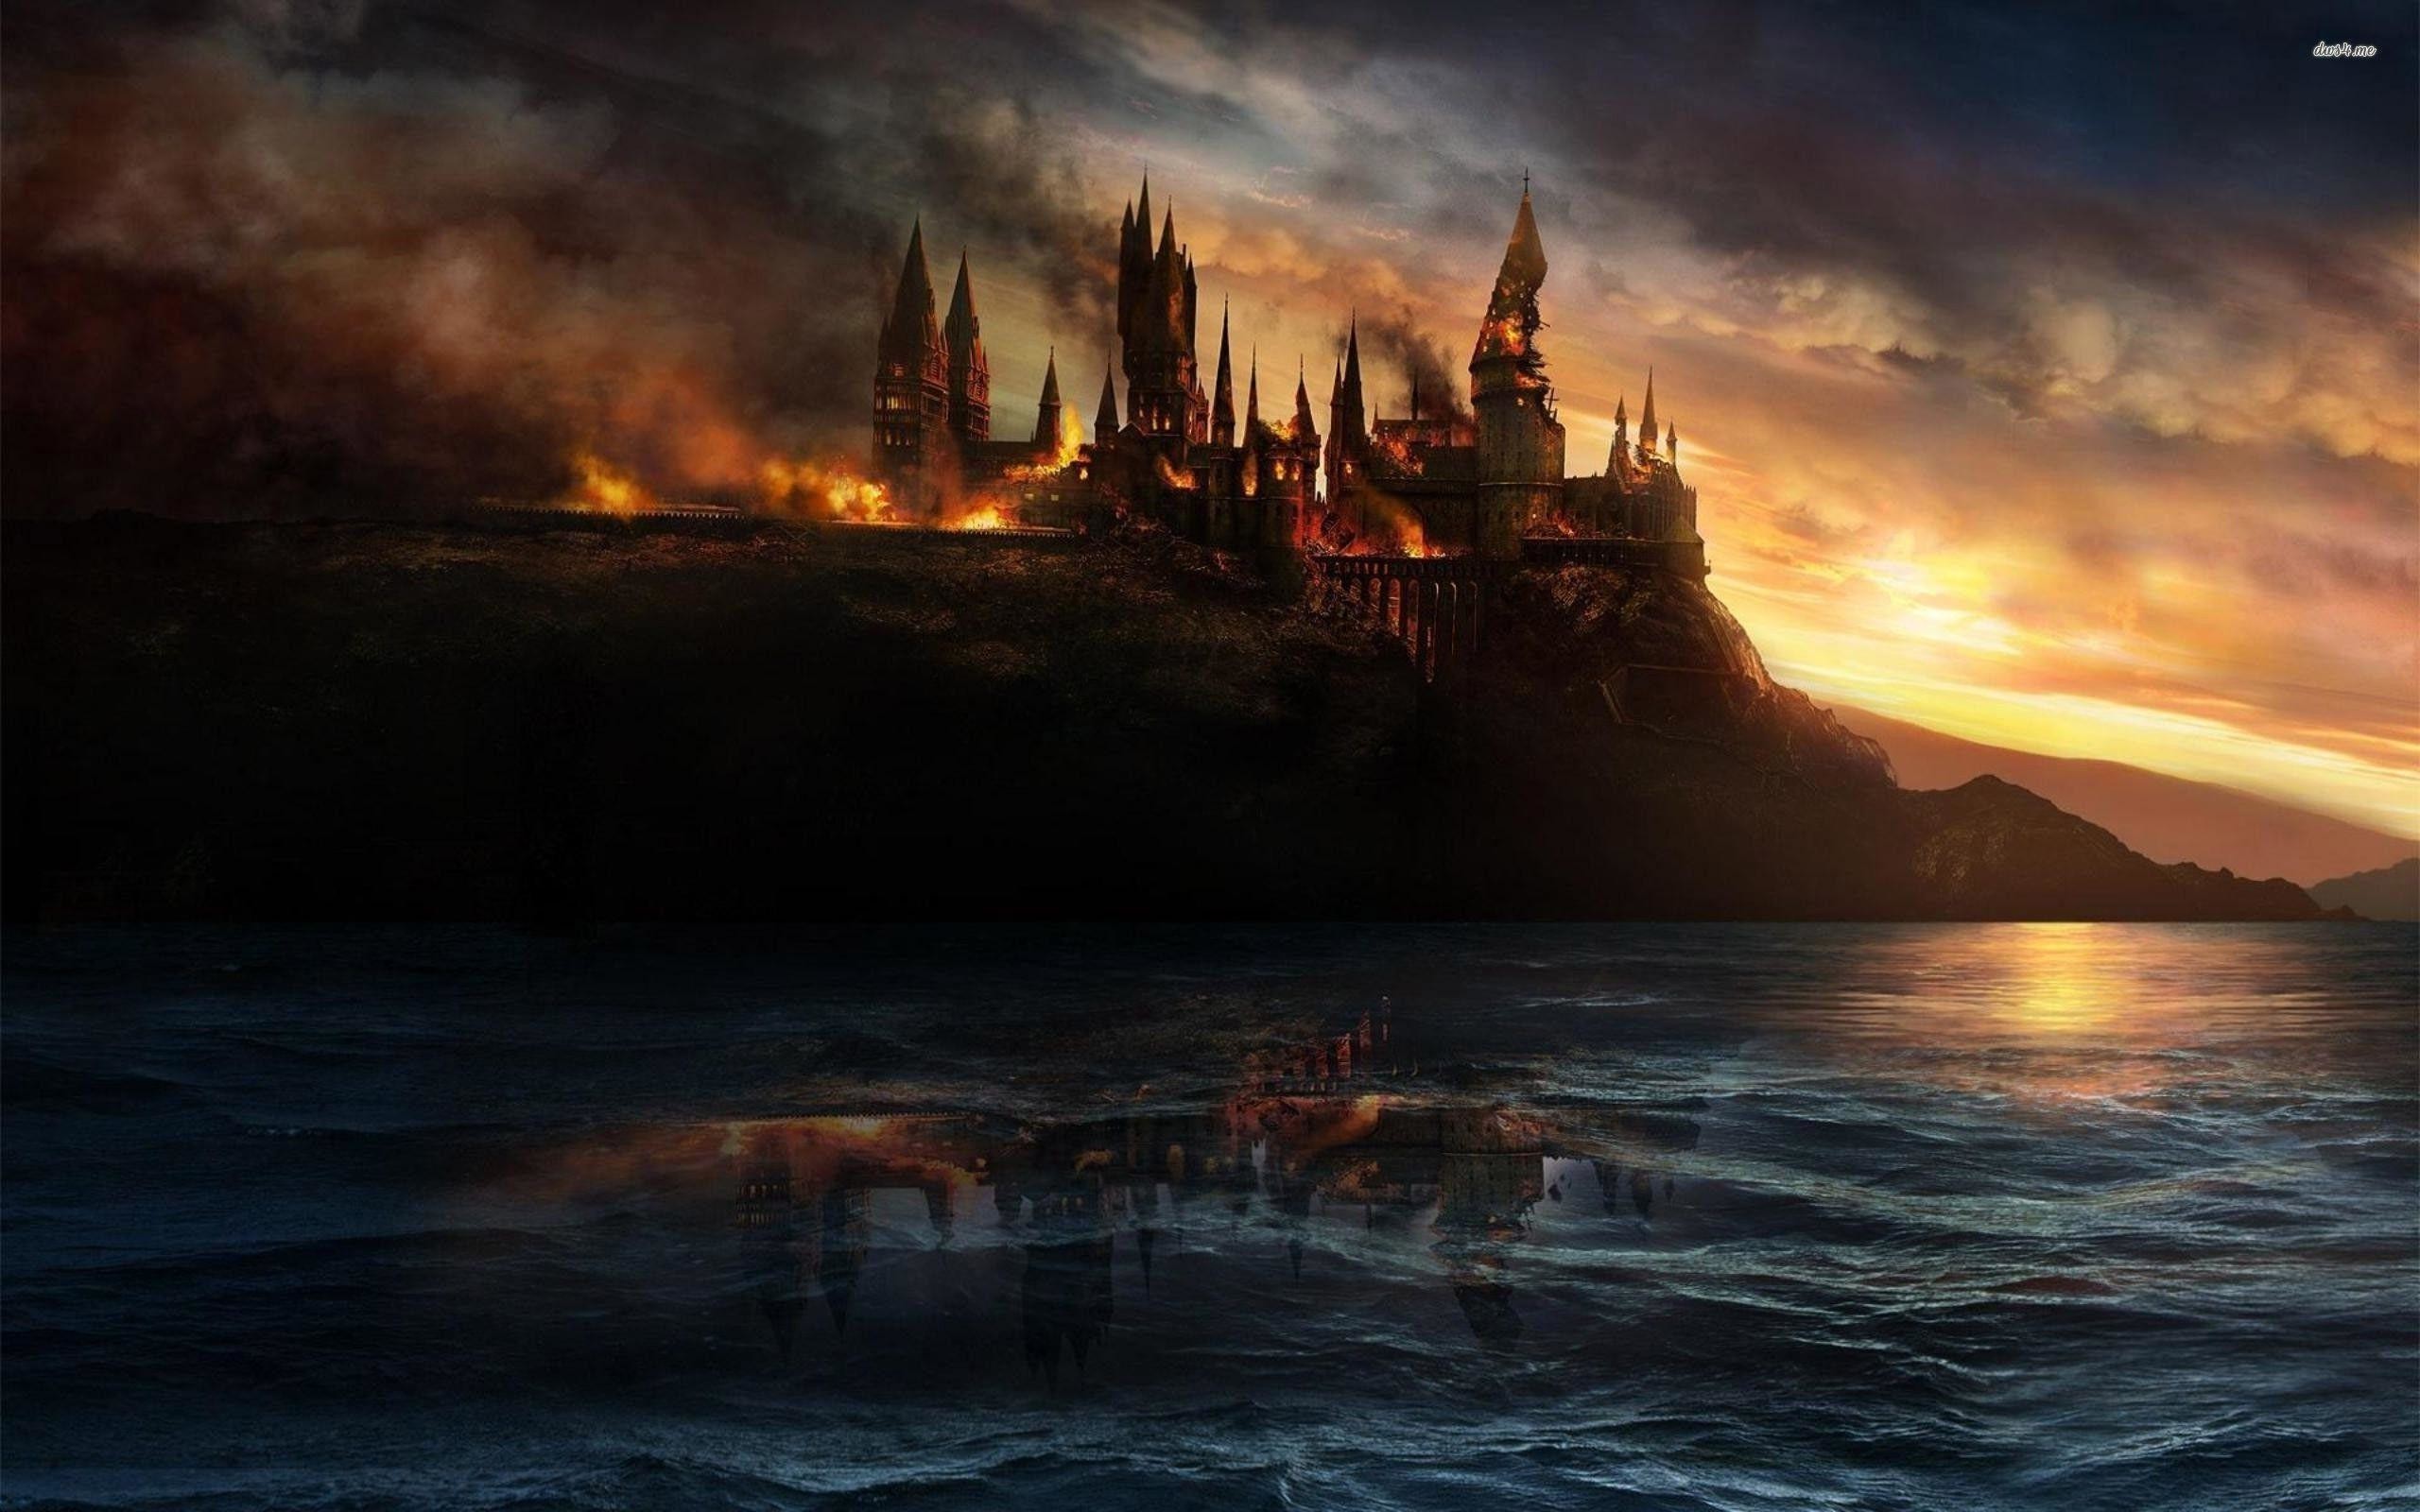 1080p Ultra Hd Harry Potter Hd Wallpapers - Free HD Wallpapers